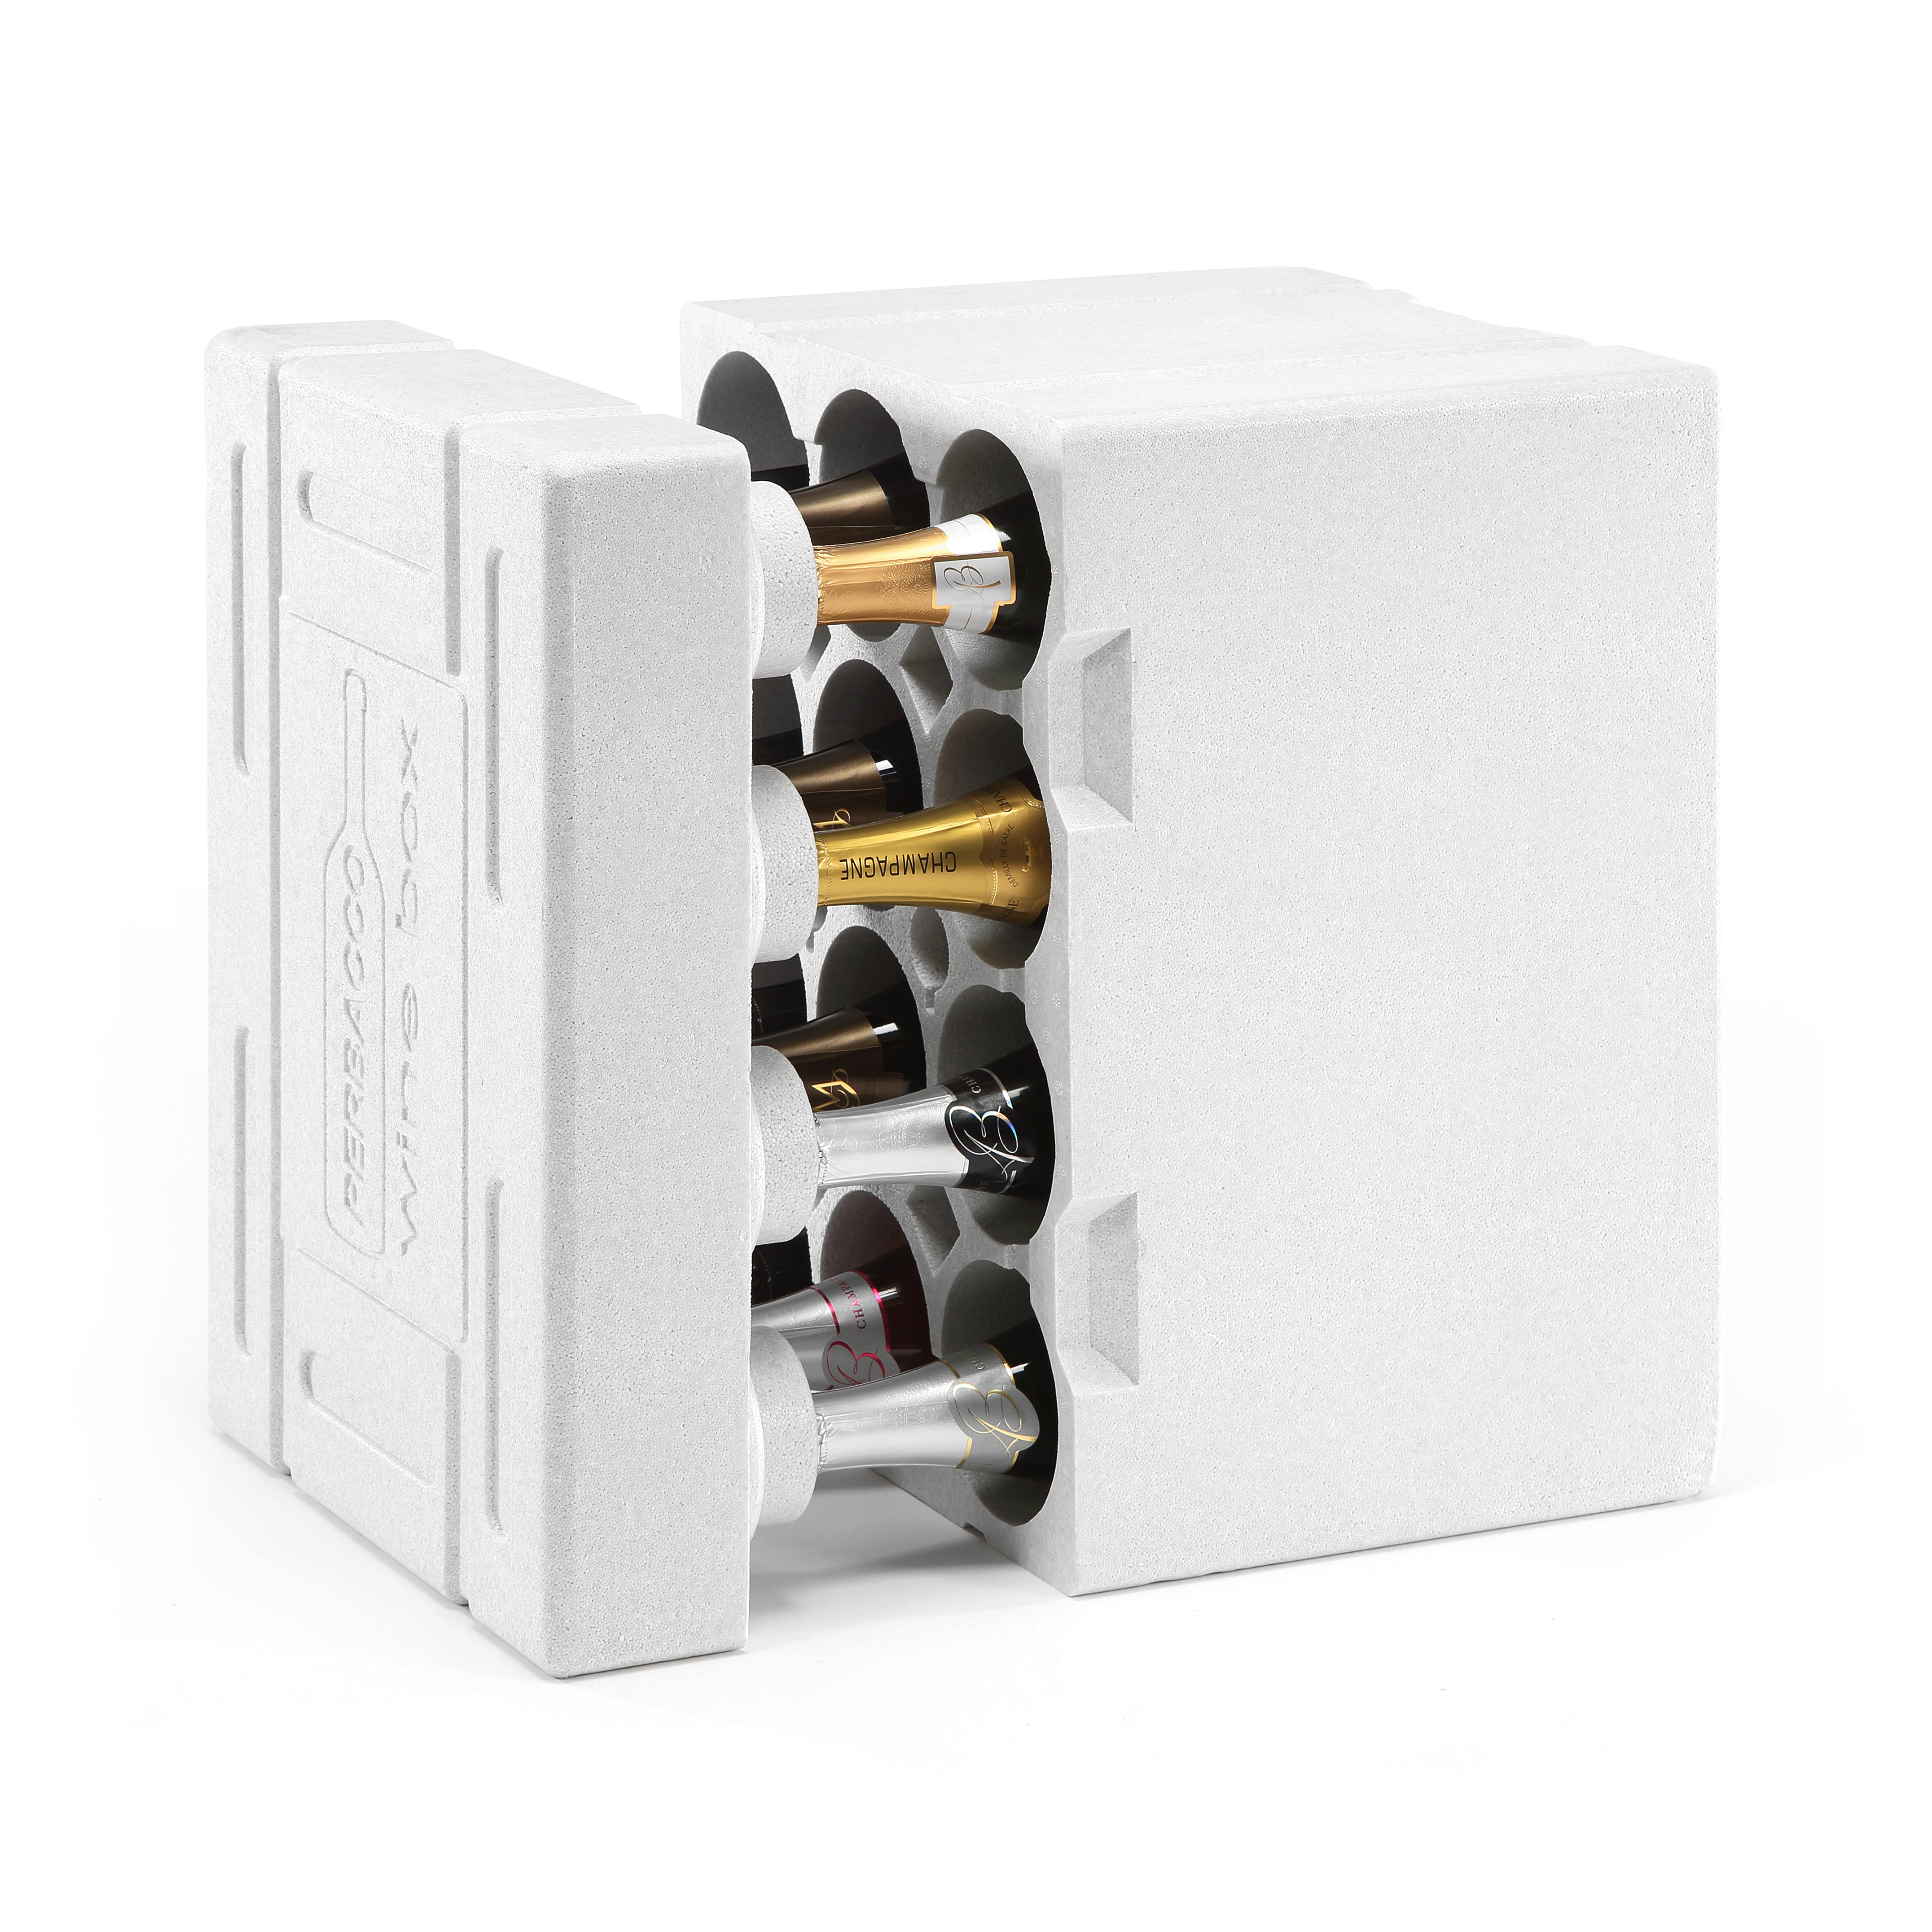 12-Bottle Wine Box For Shipping & Plane Transport - INSERT REPLACEMENT FOR YOUR WINE CHECK LUGGAGE